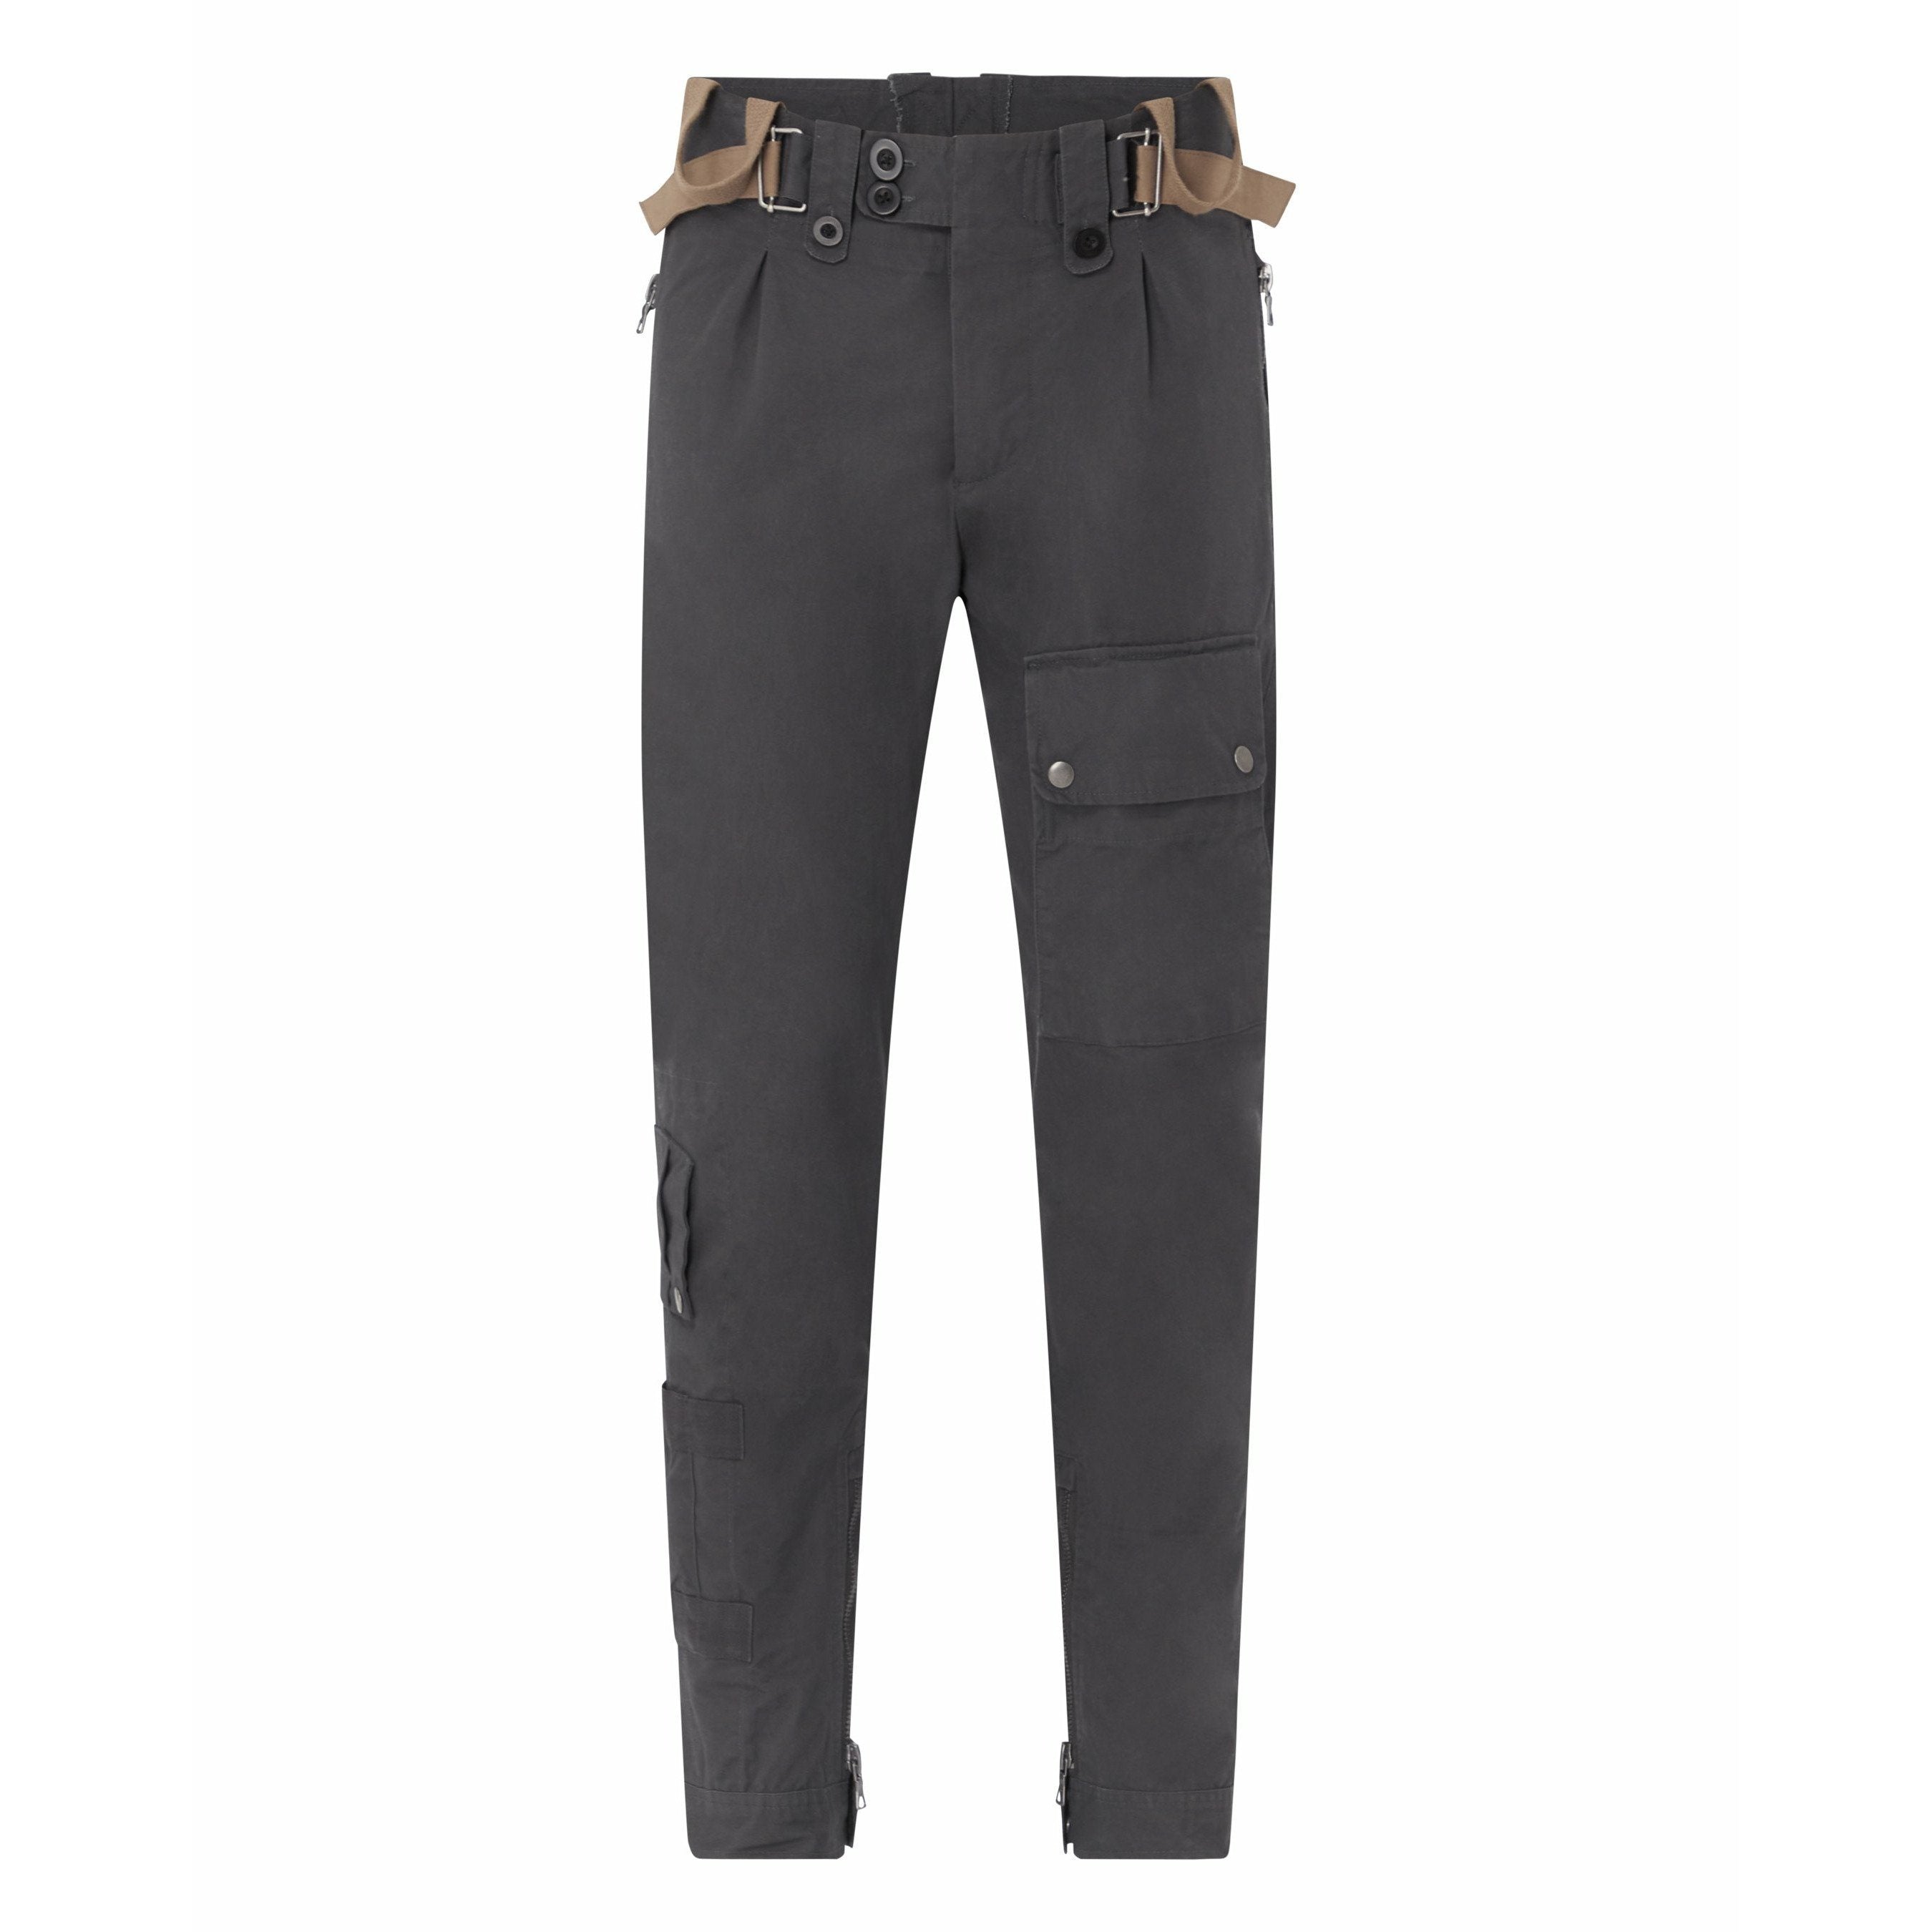 James Bond No Time To Die Combat Trousers By N.Peal | 007Store